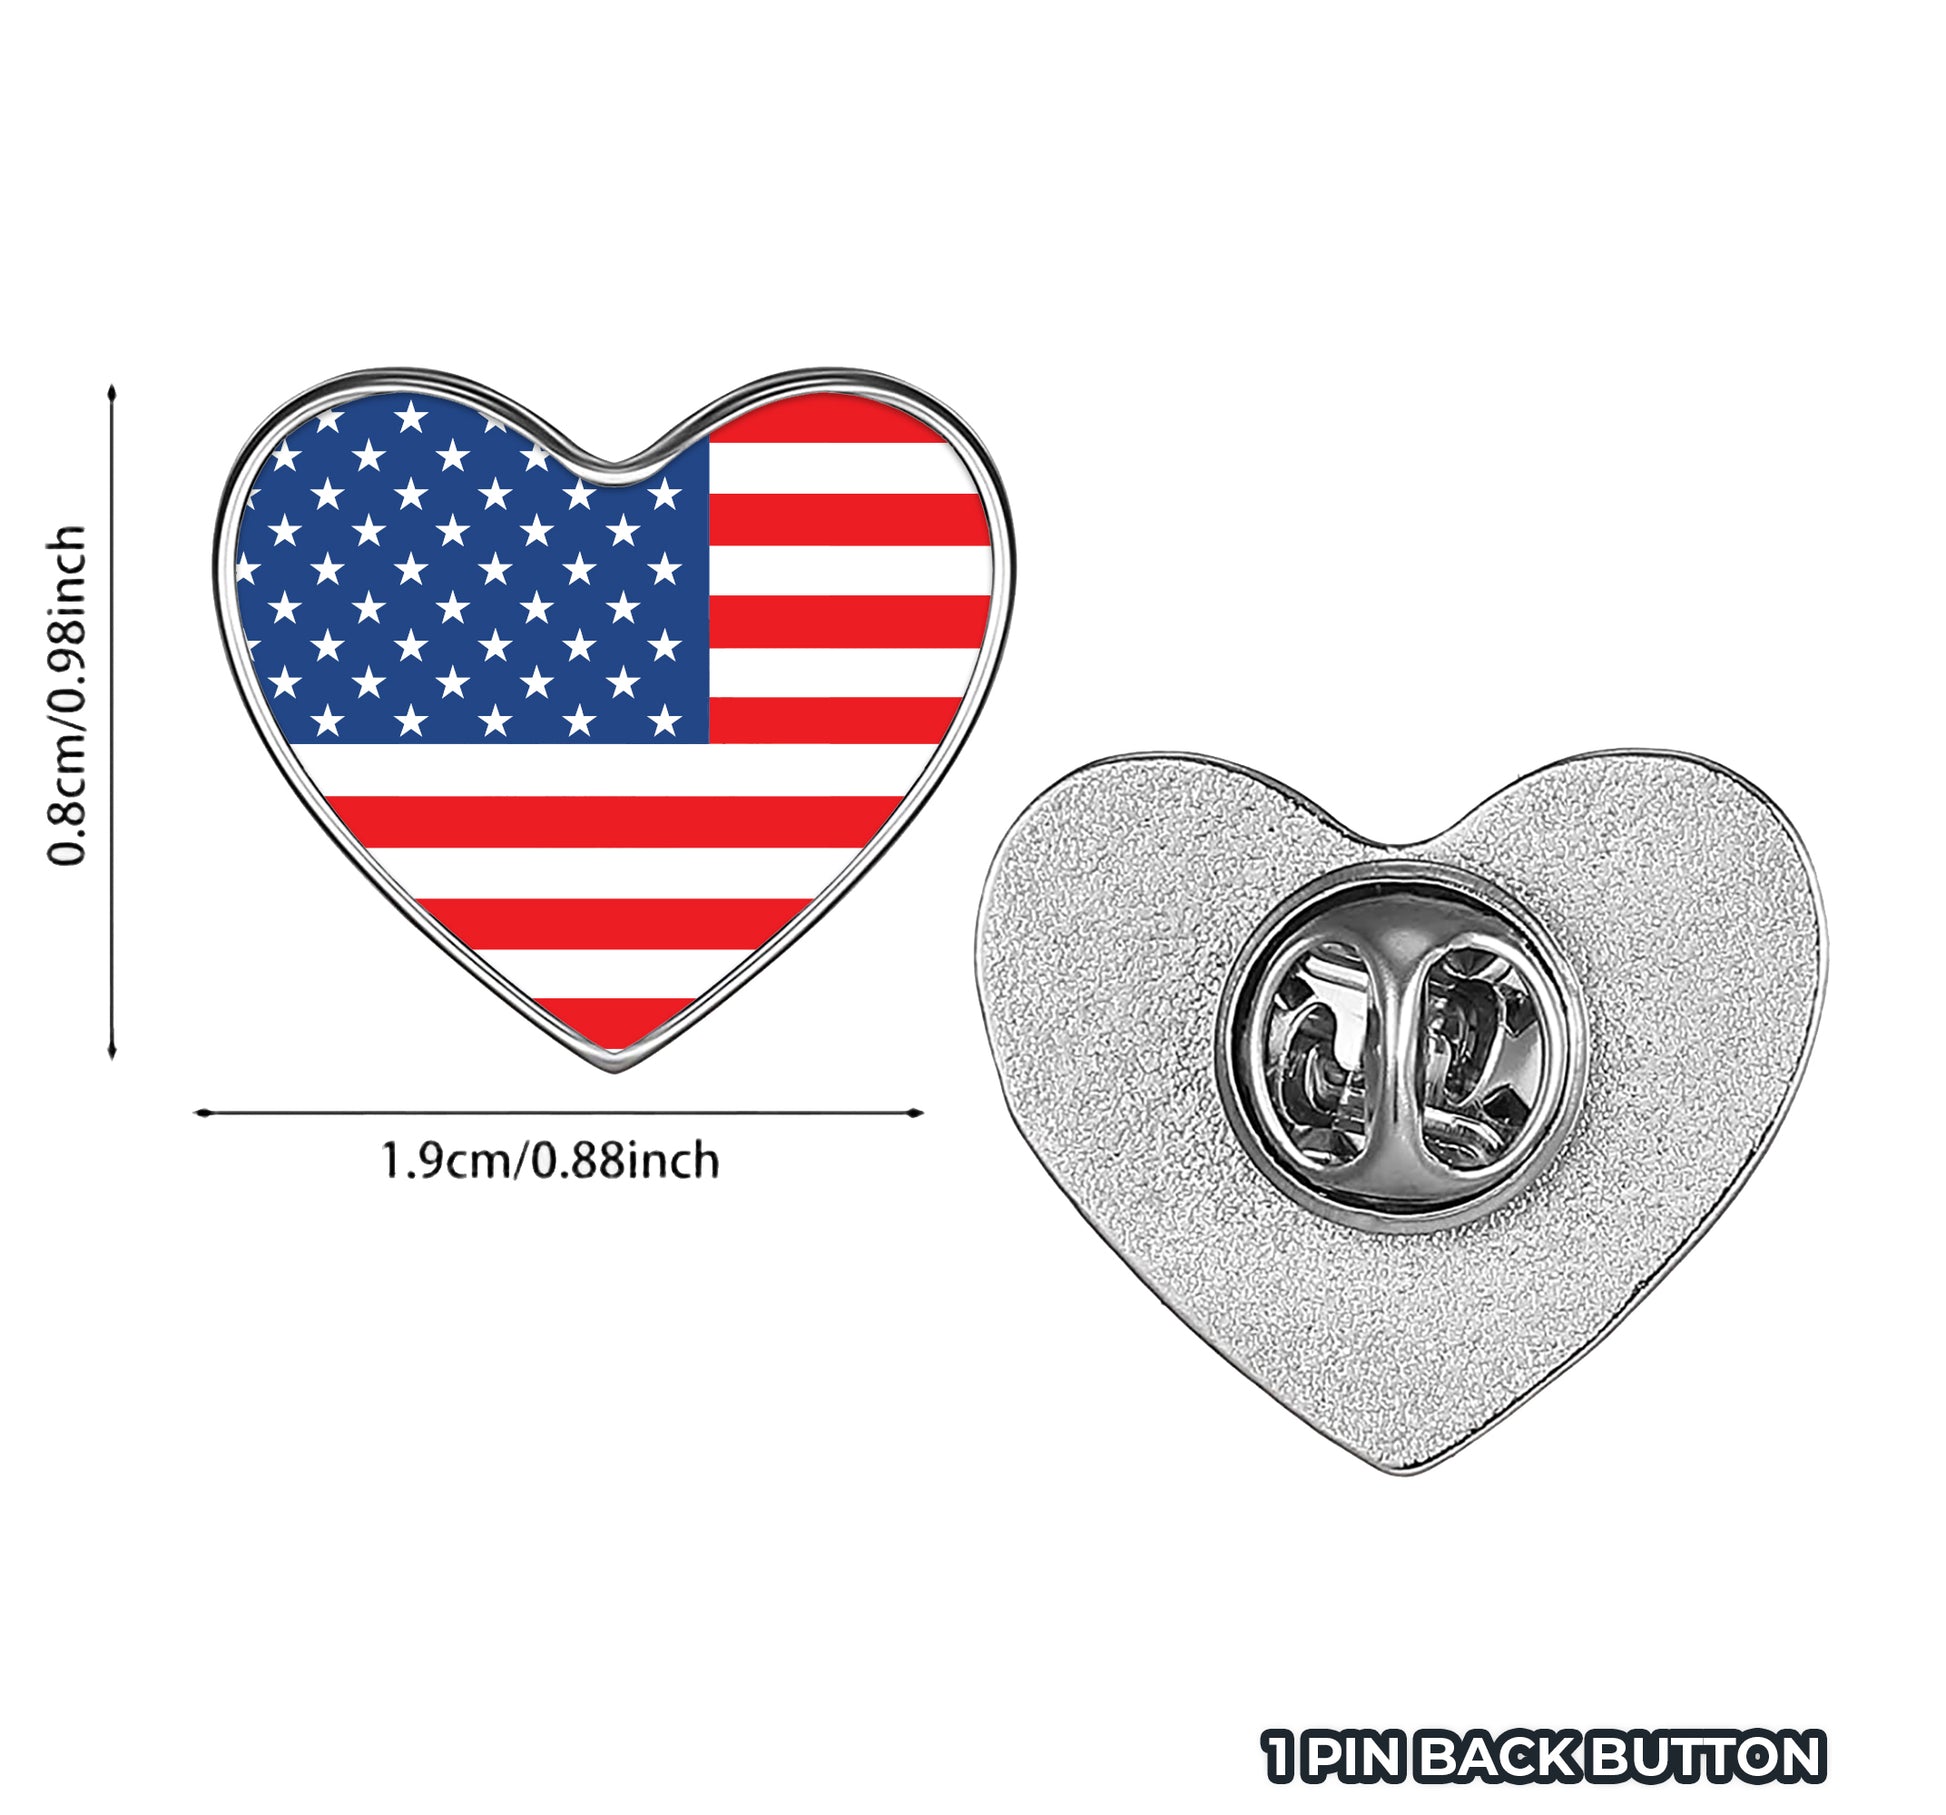 World Flag Metal Heart Pinback Lapel Button - You Pick Your Flag, Many to Choose from!